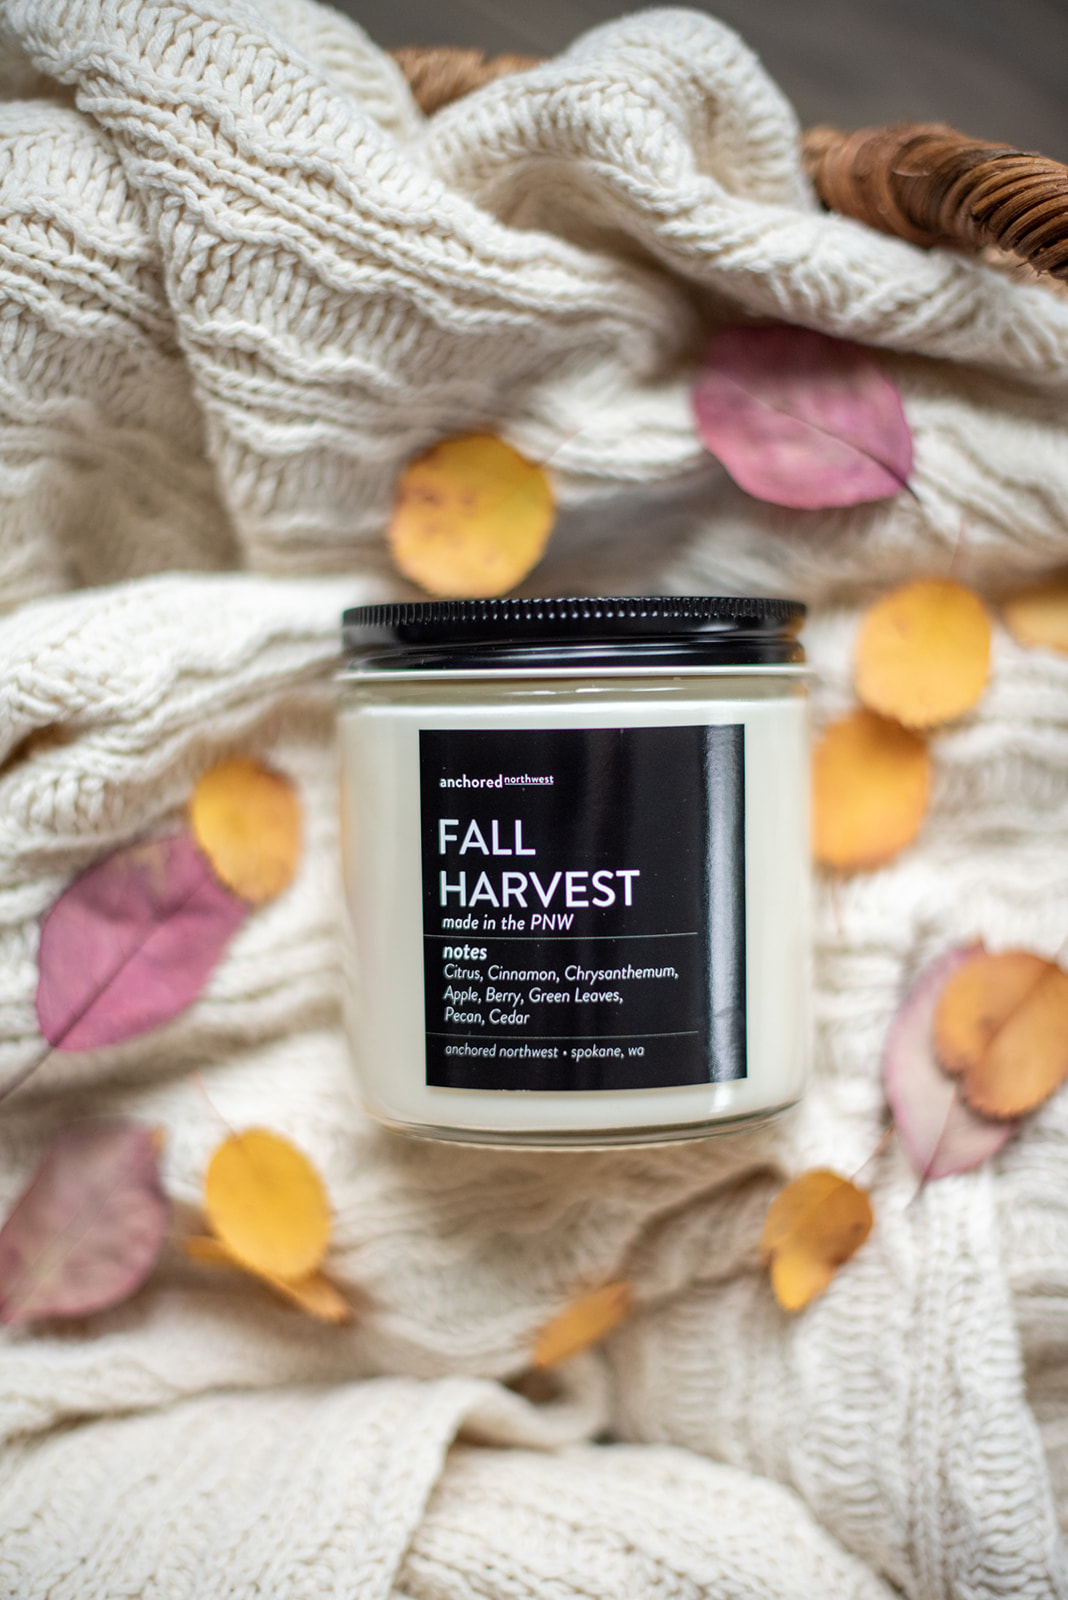 Fall Scents, Fall Scented Candles & Fragrance